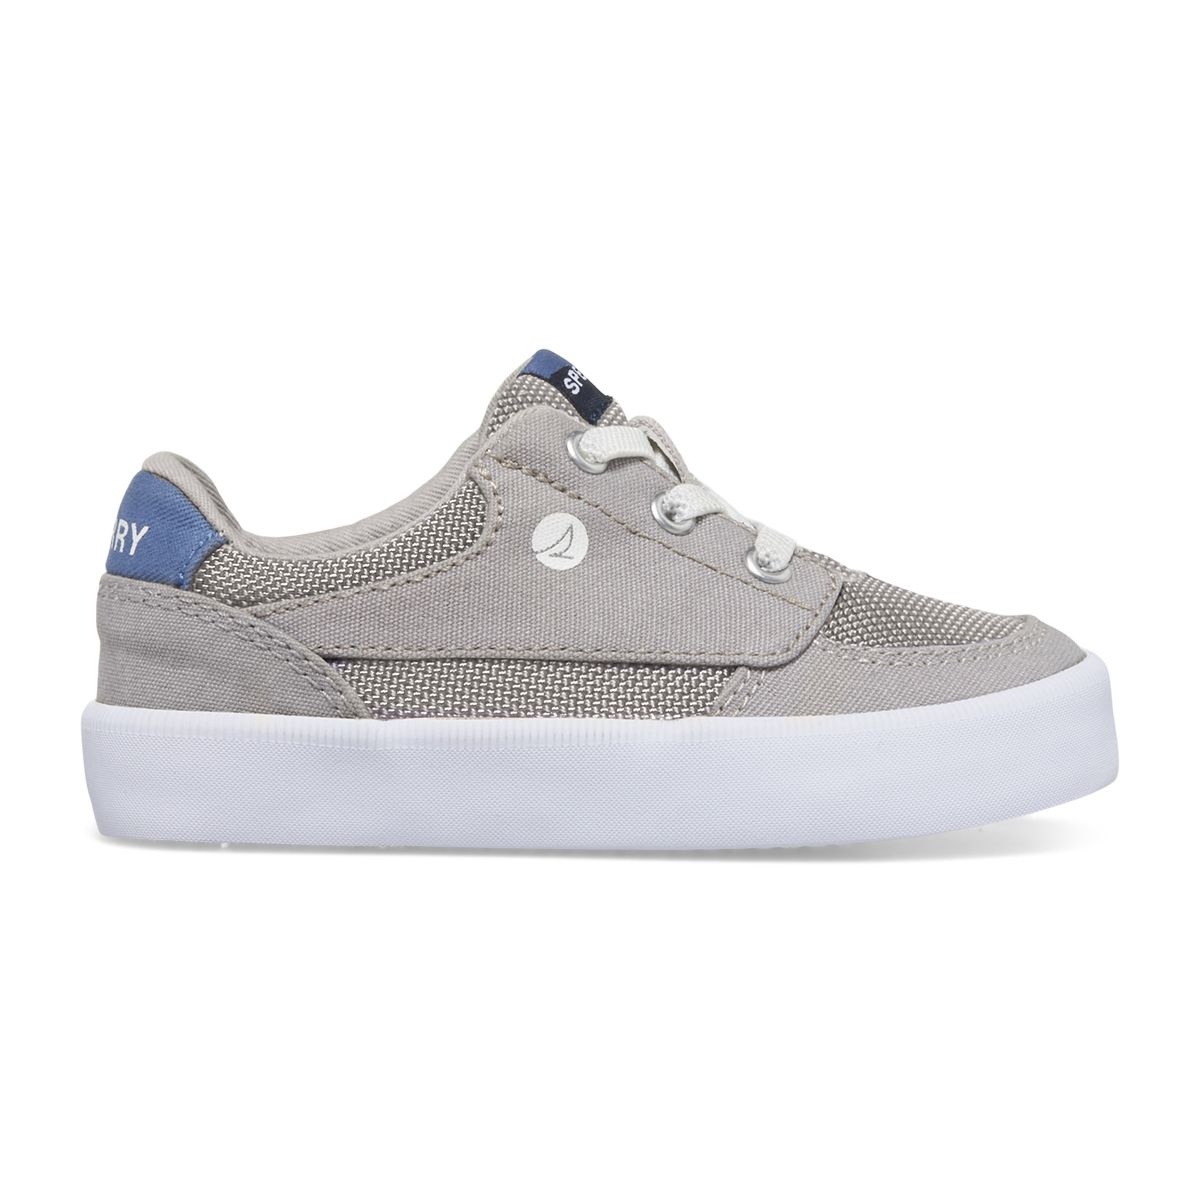 Kid's Sneakers & Casual Shoes | Sperry